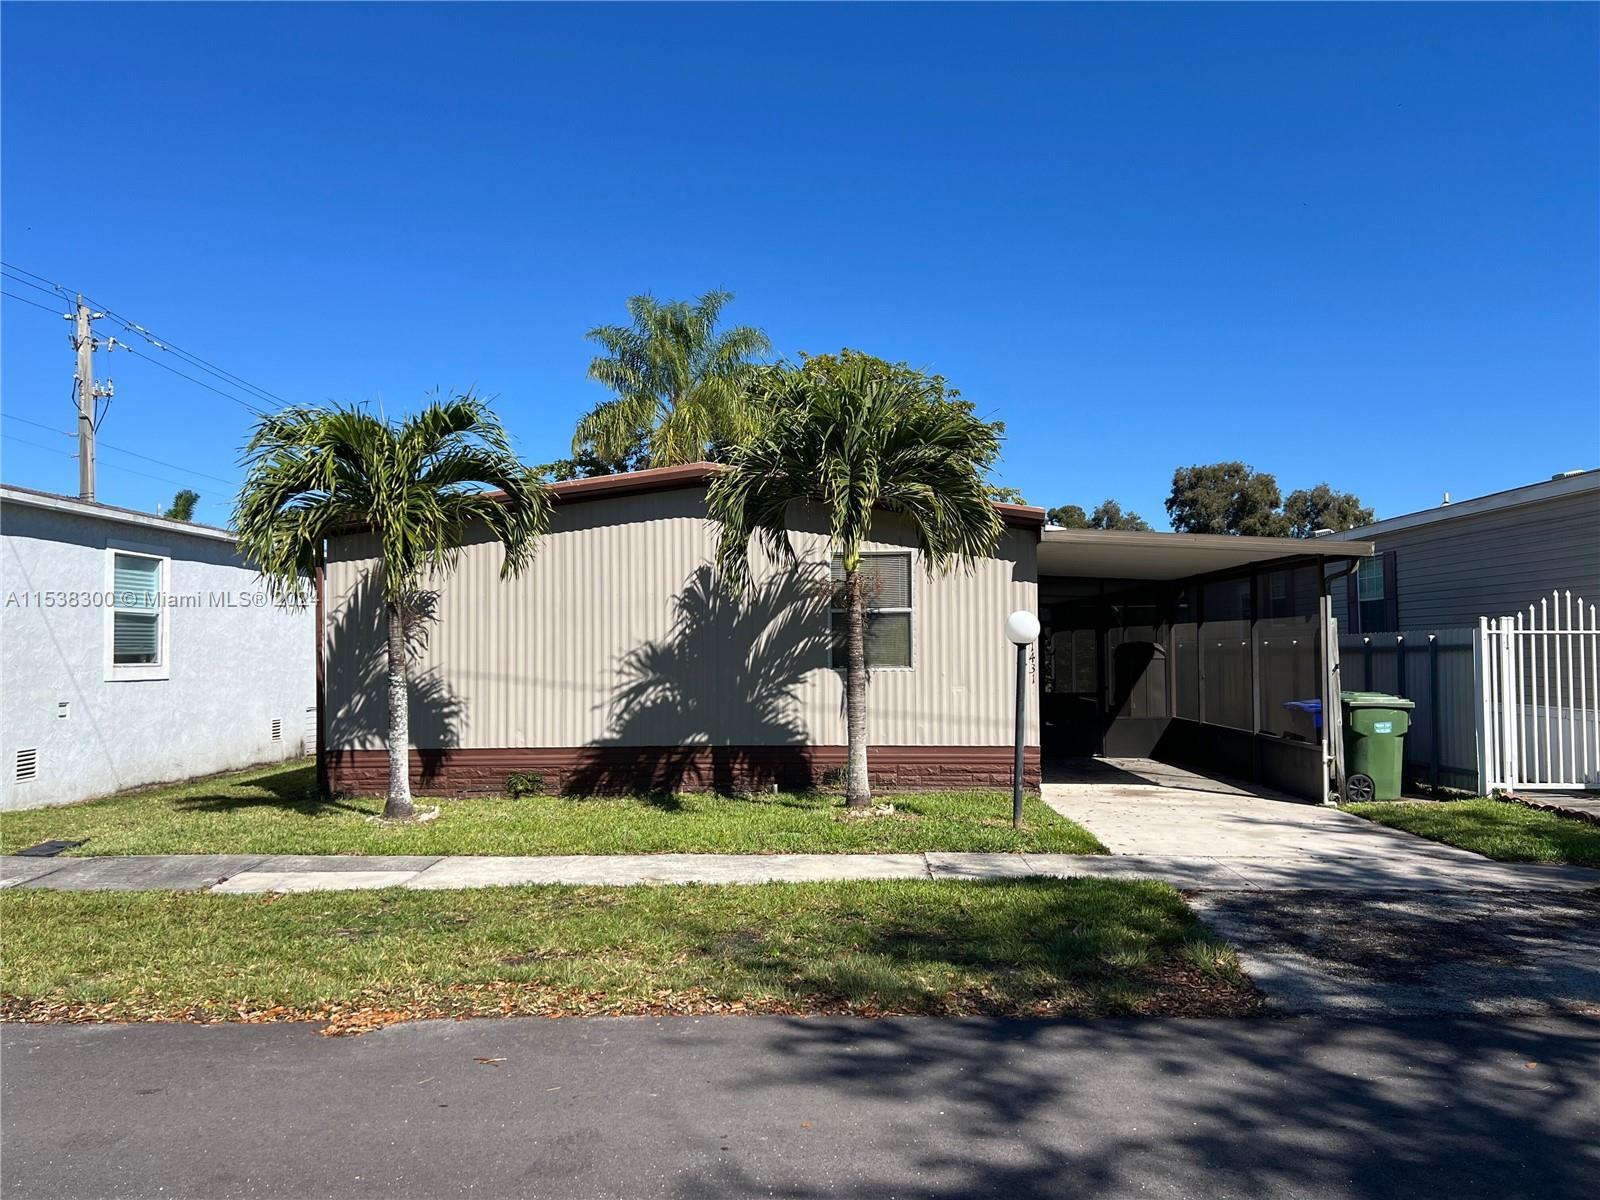 Photo of 21431 NW 7th Ct in Pembroke Pines, FL